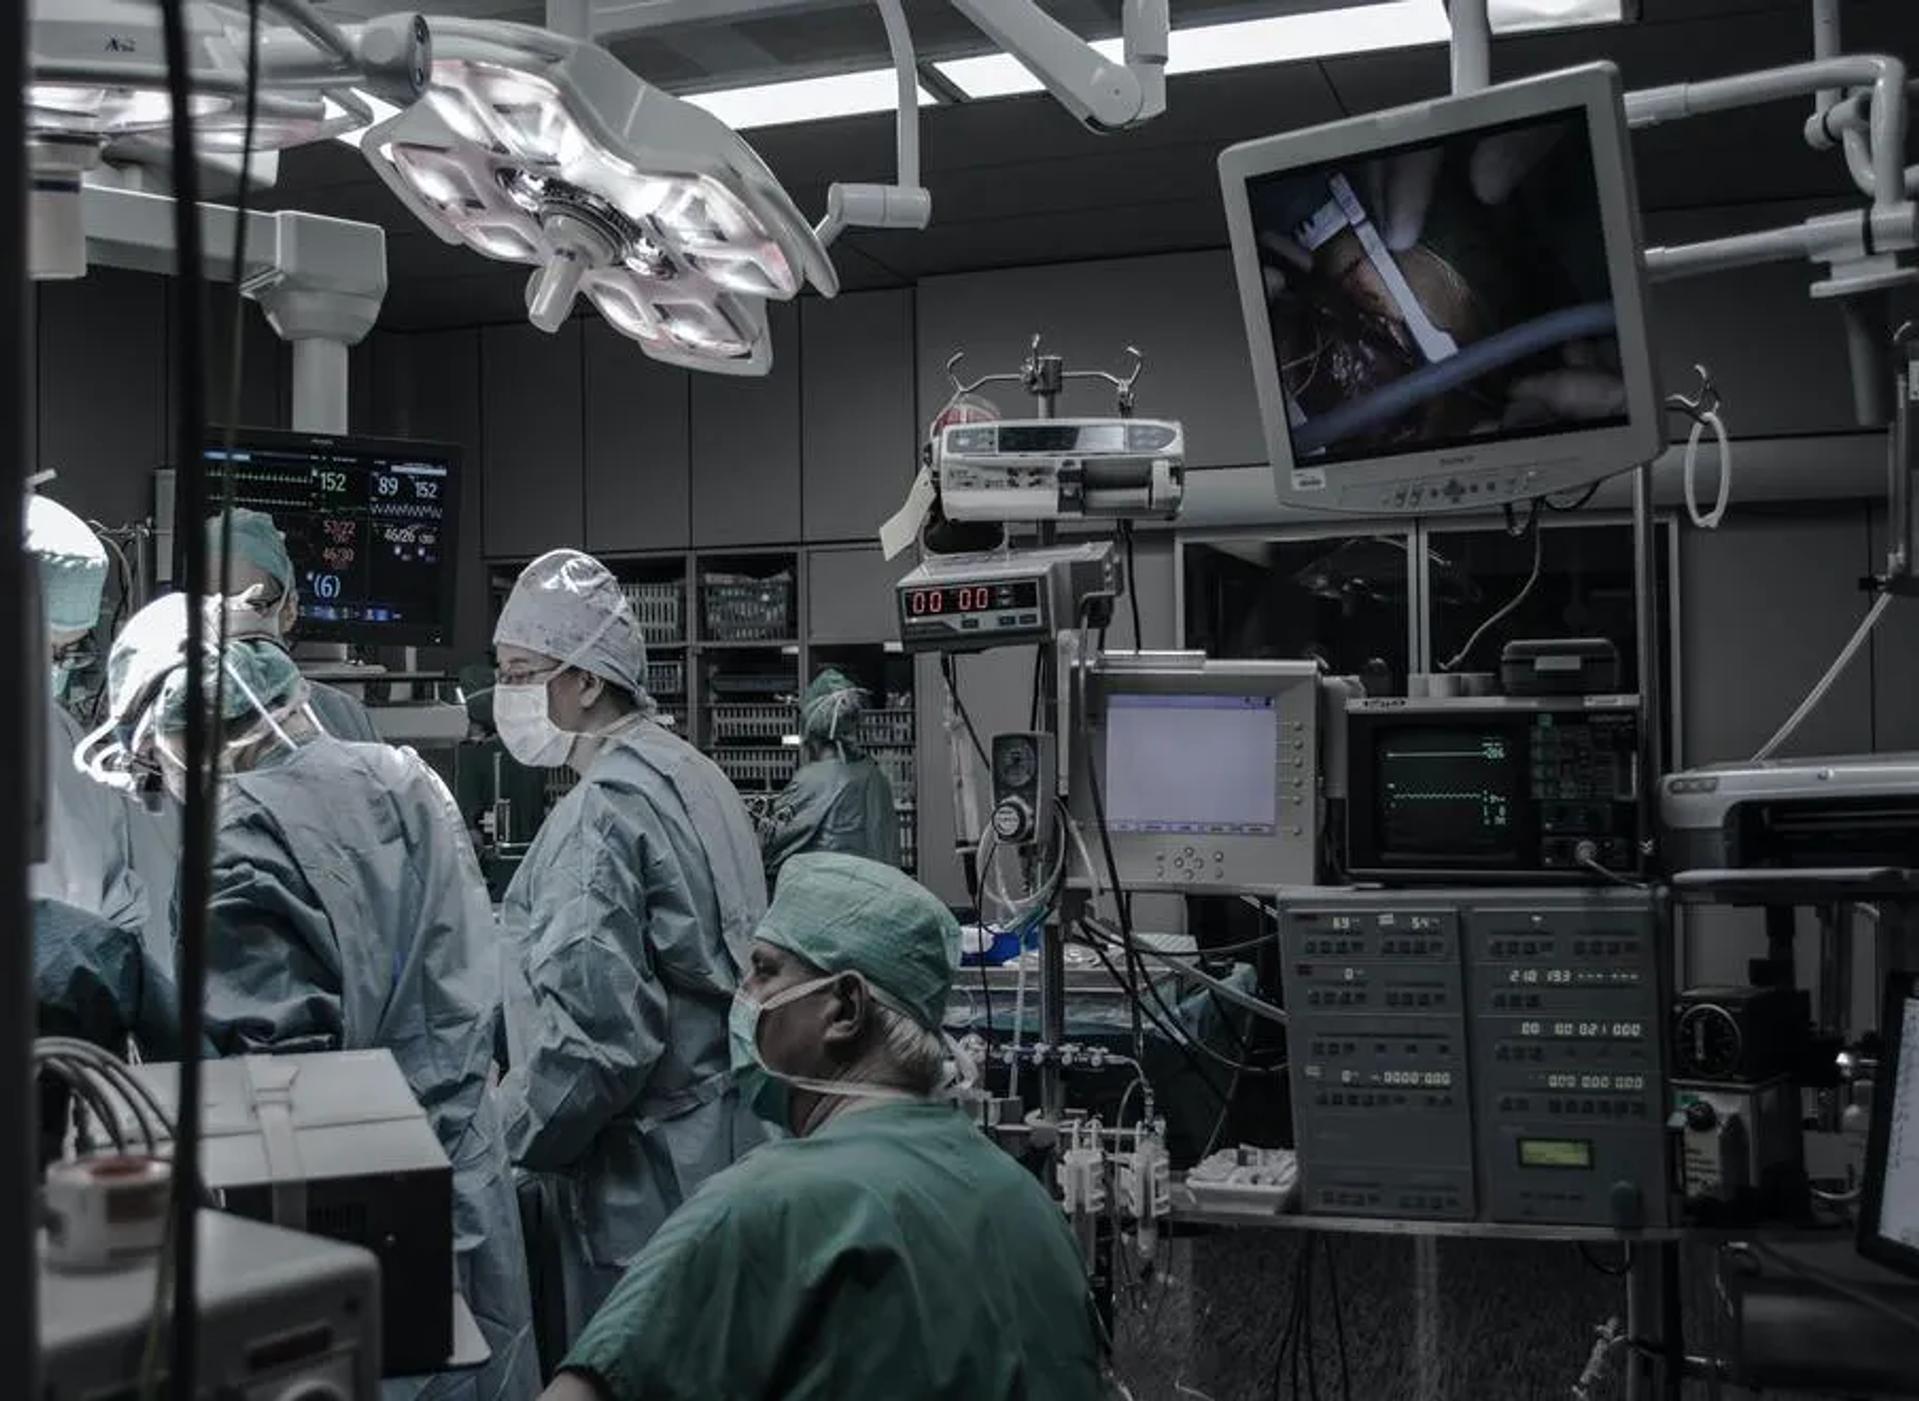 Doctors and nurses working an operating room